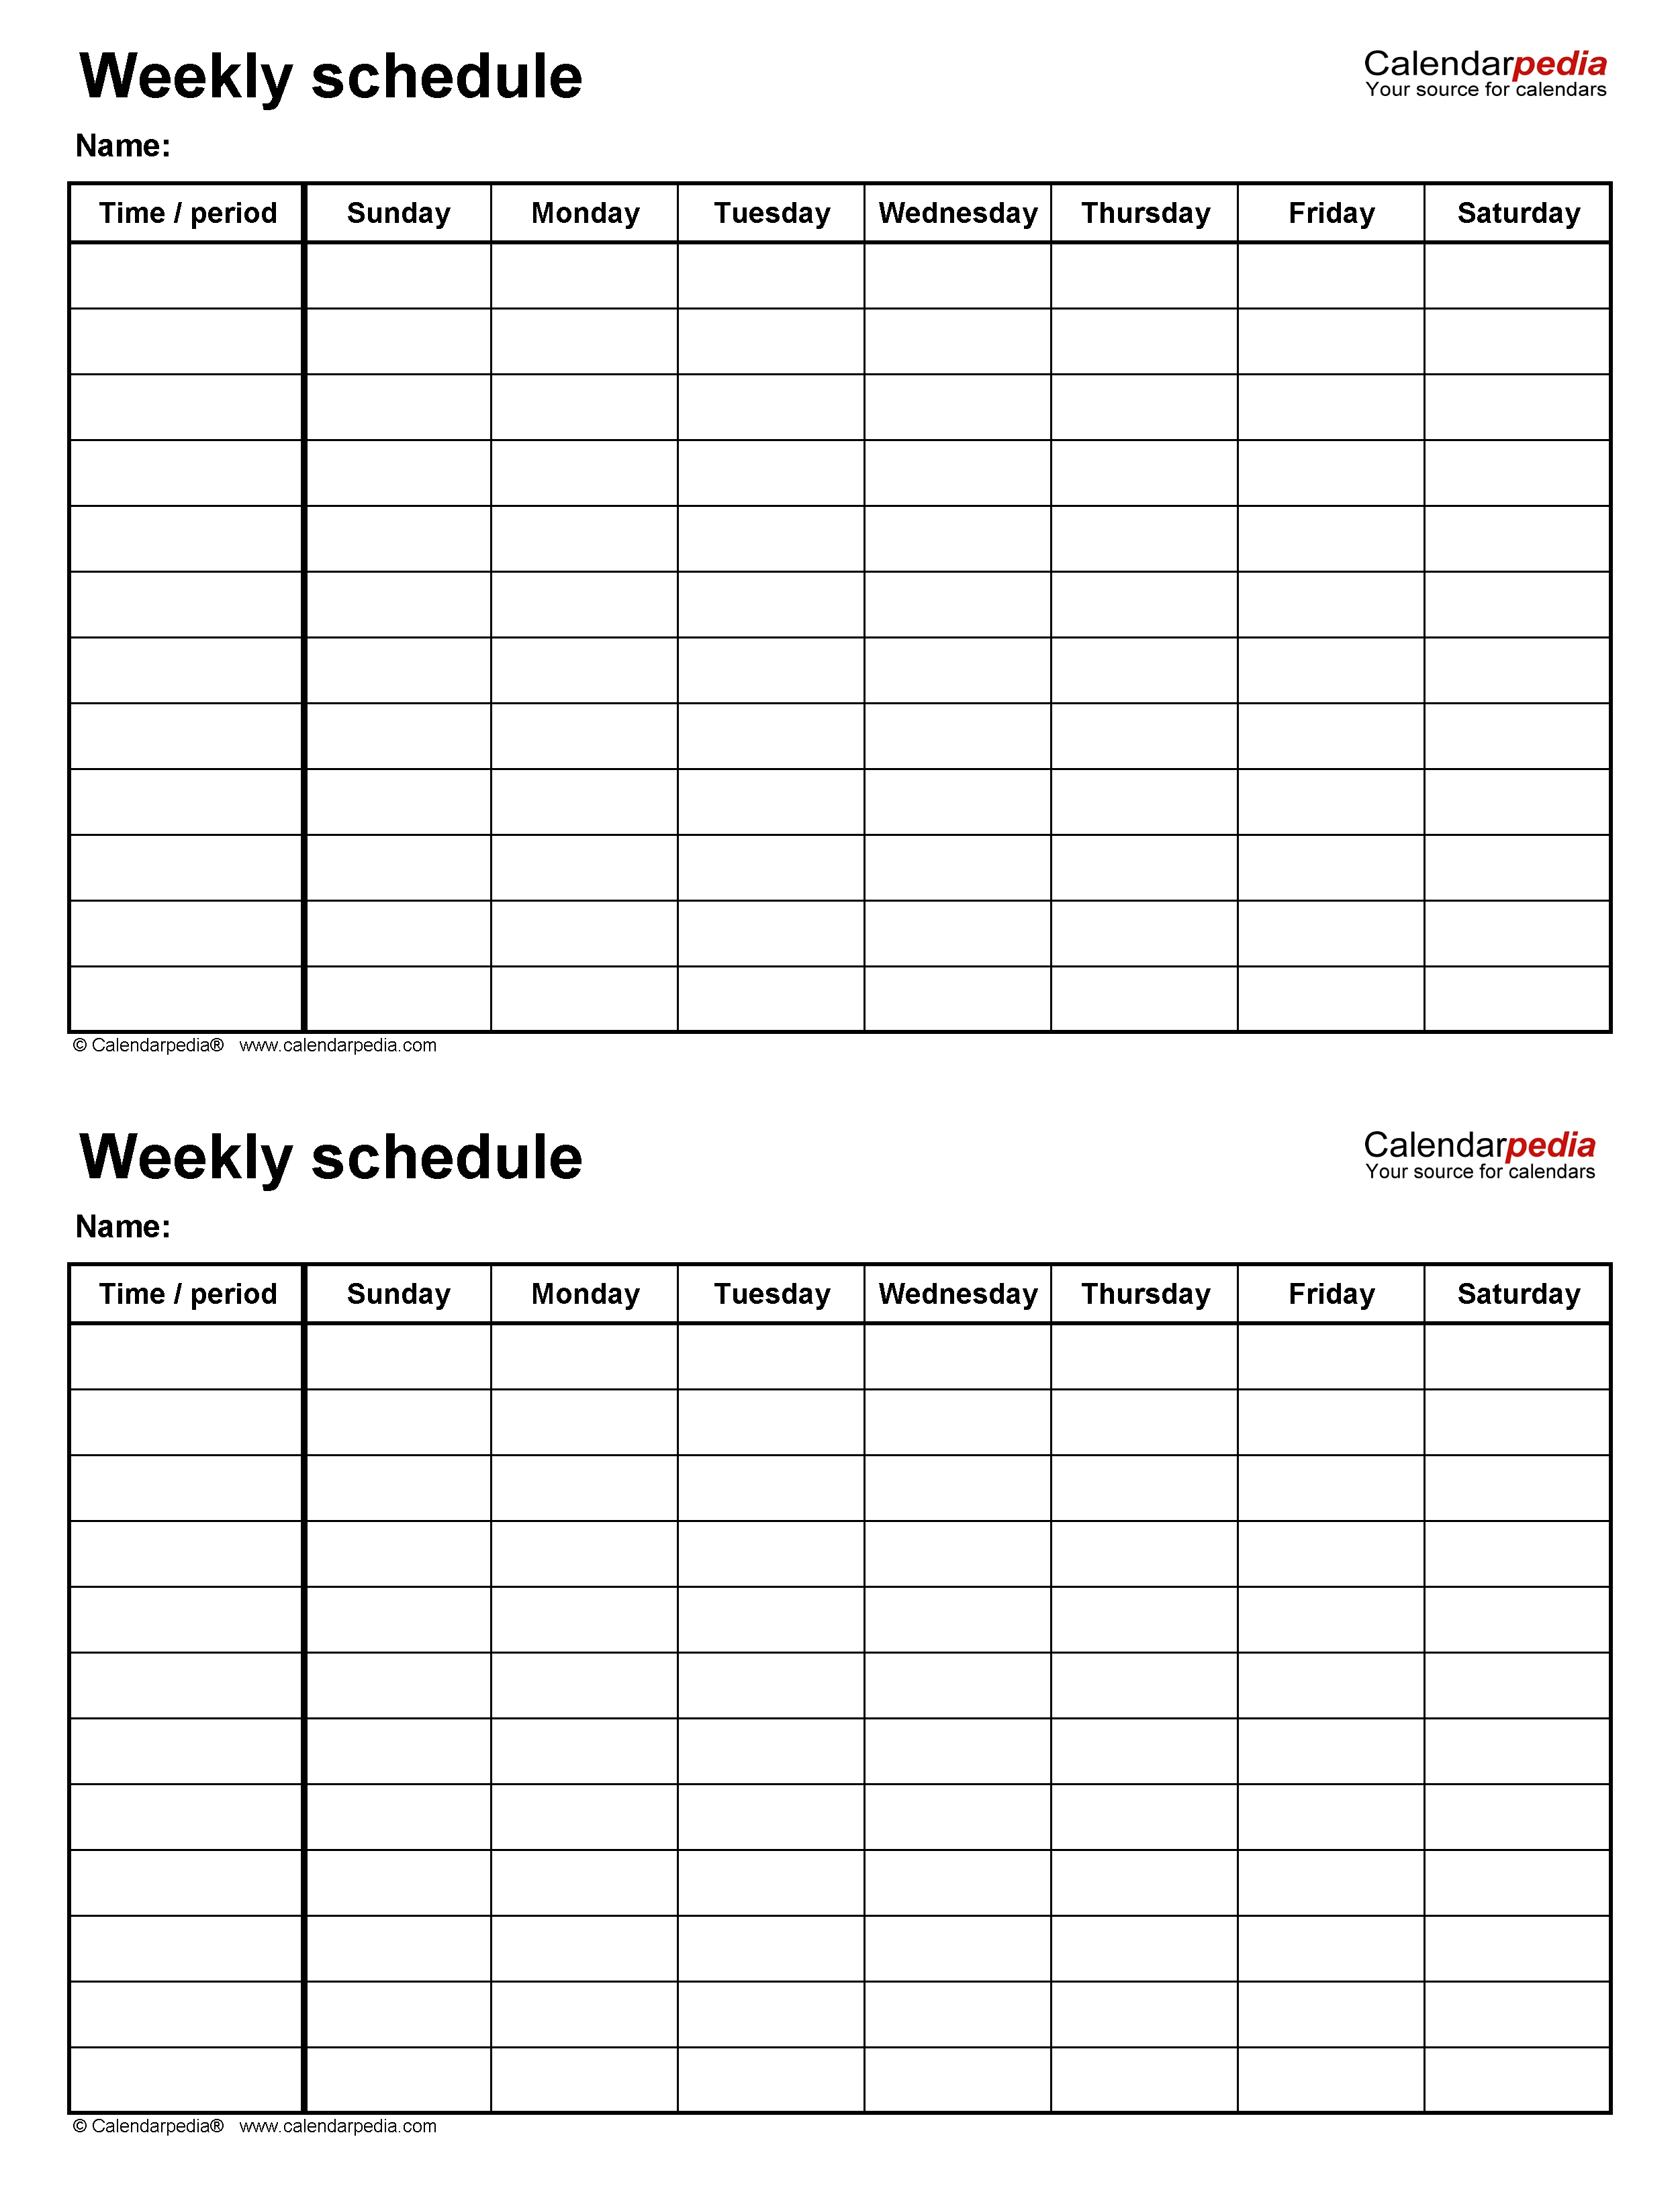 Free Weekly Schedule Templates For Word - 18 Templates with Monday Through Friday Appointment Calendar